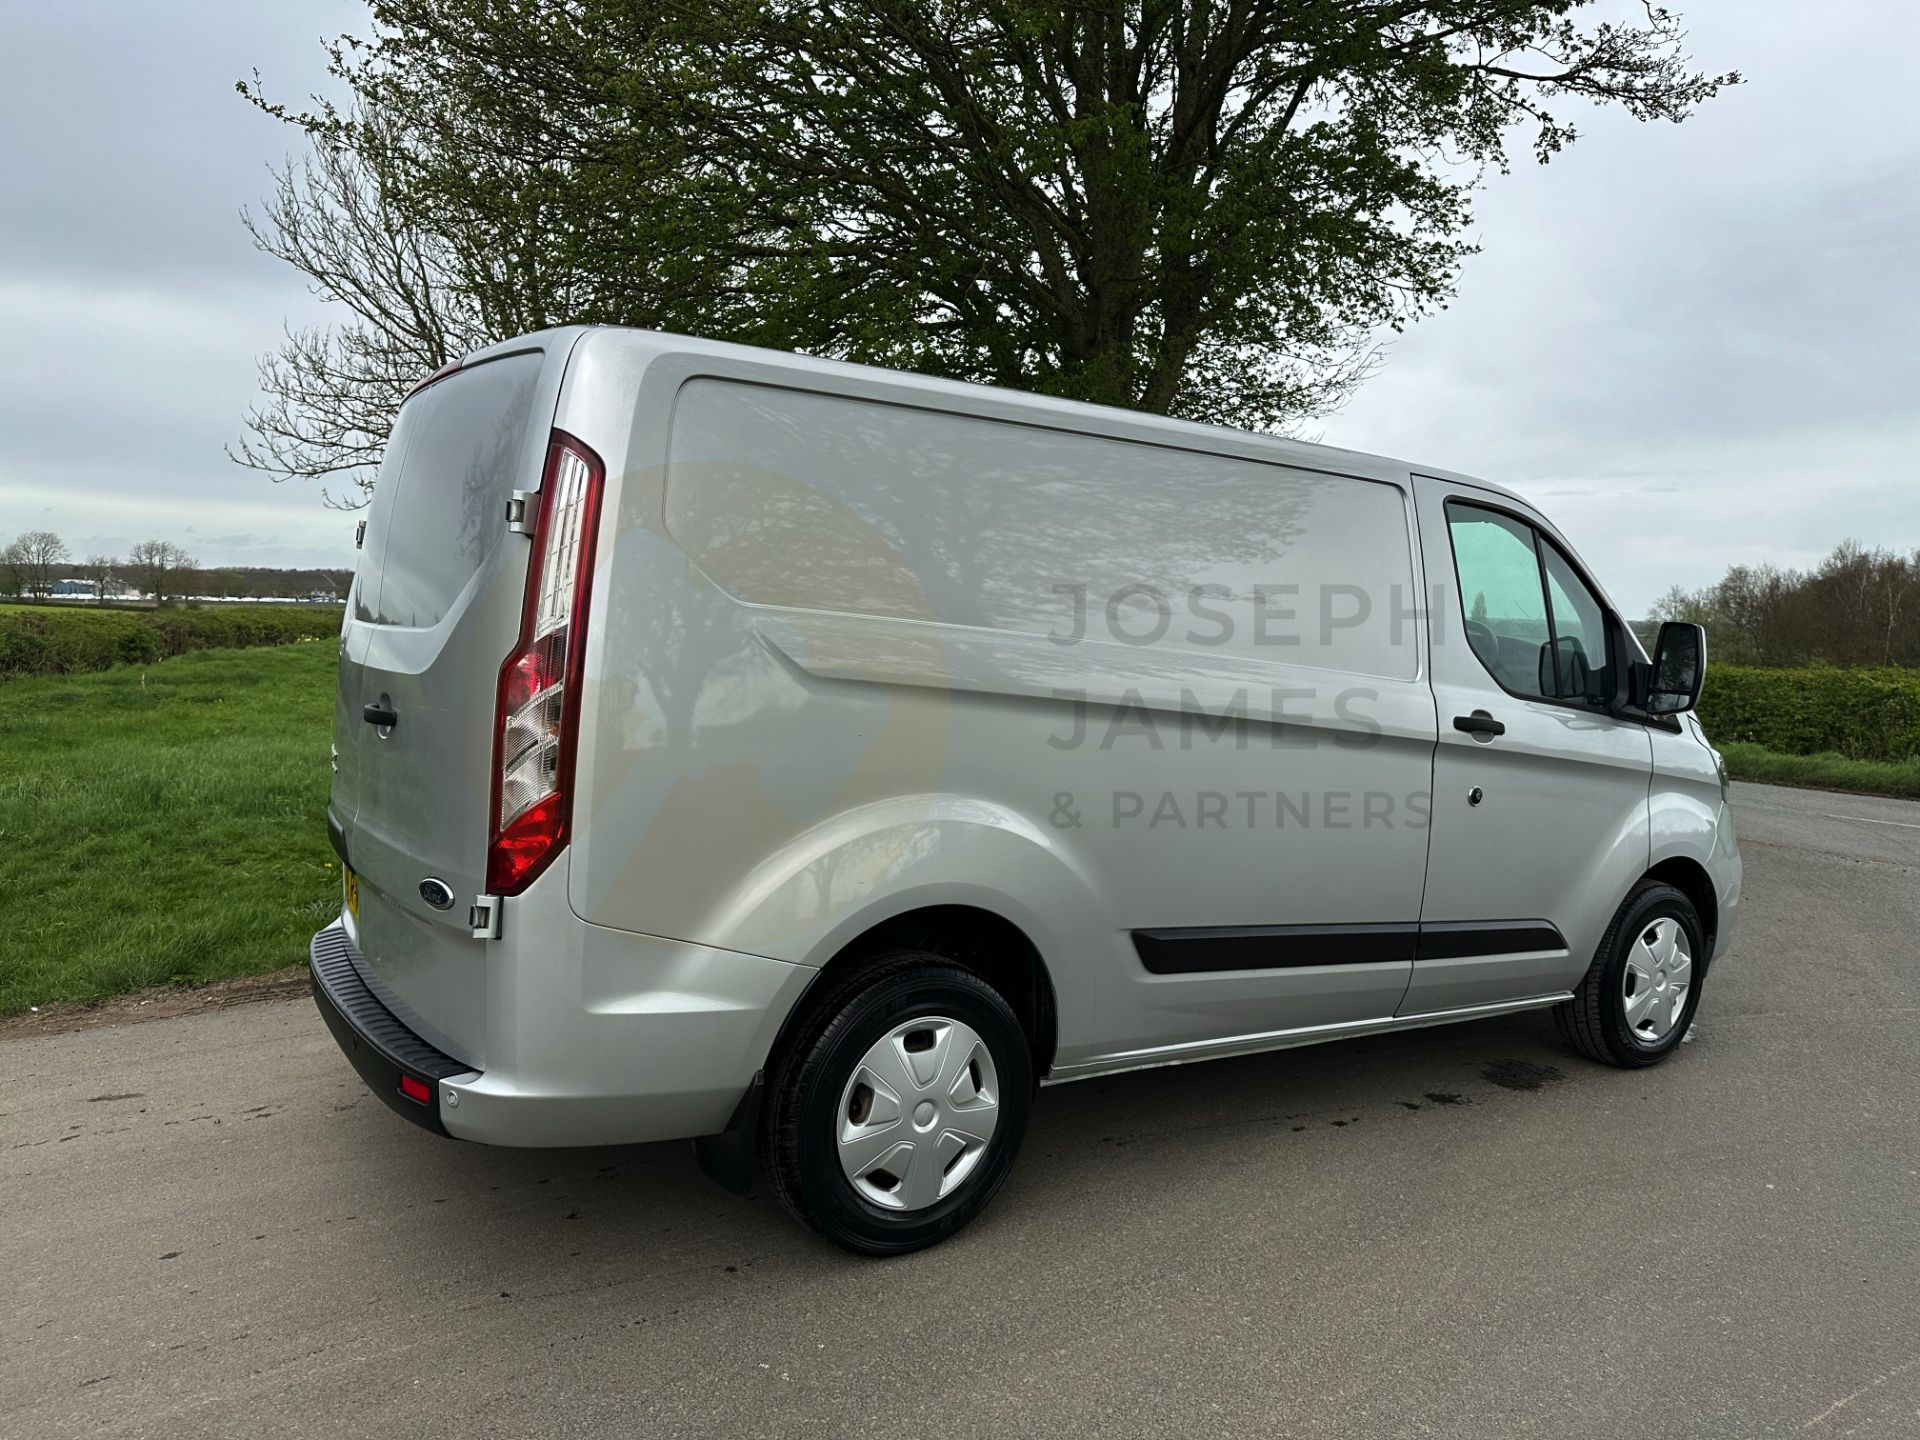 (ON SALE) FORD TRANSIT CUSTOM "TREND" 2.0TDCI (130) 20 REG -1 OWNER- SILVER -GREAT SPEC -LOW MILEAGE - Image 13 of 38